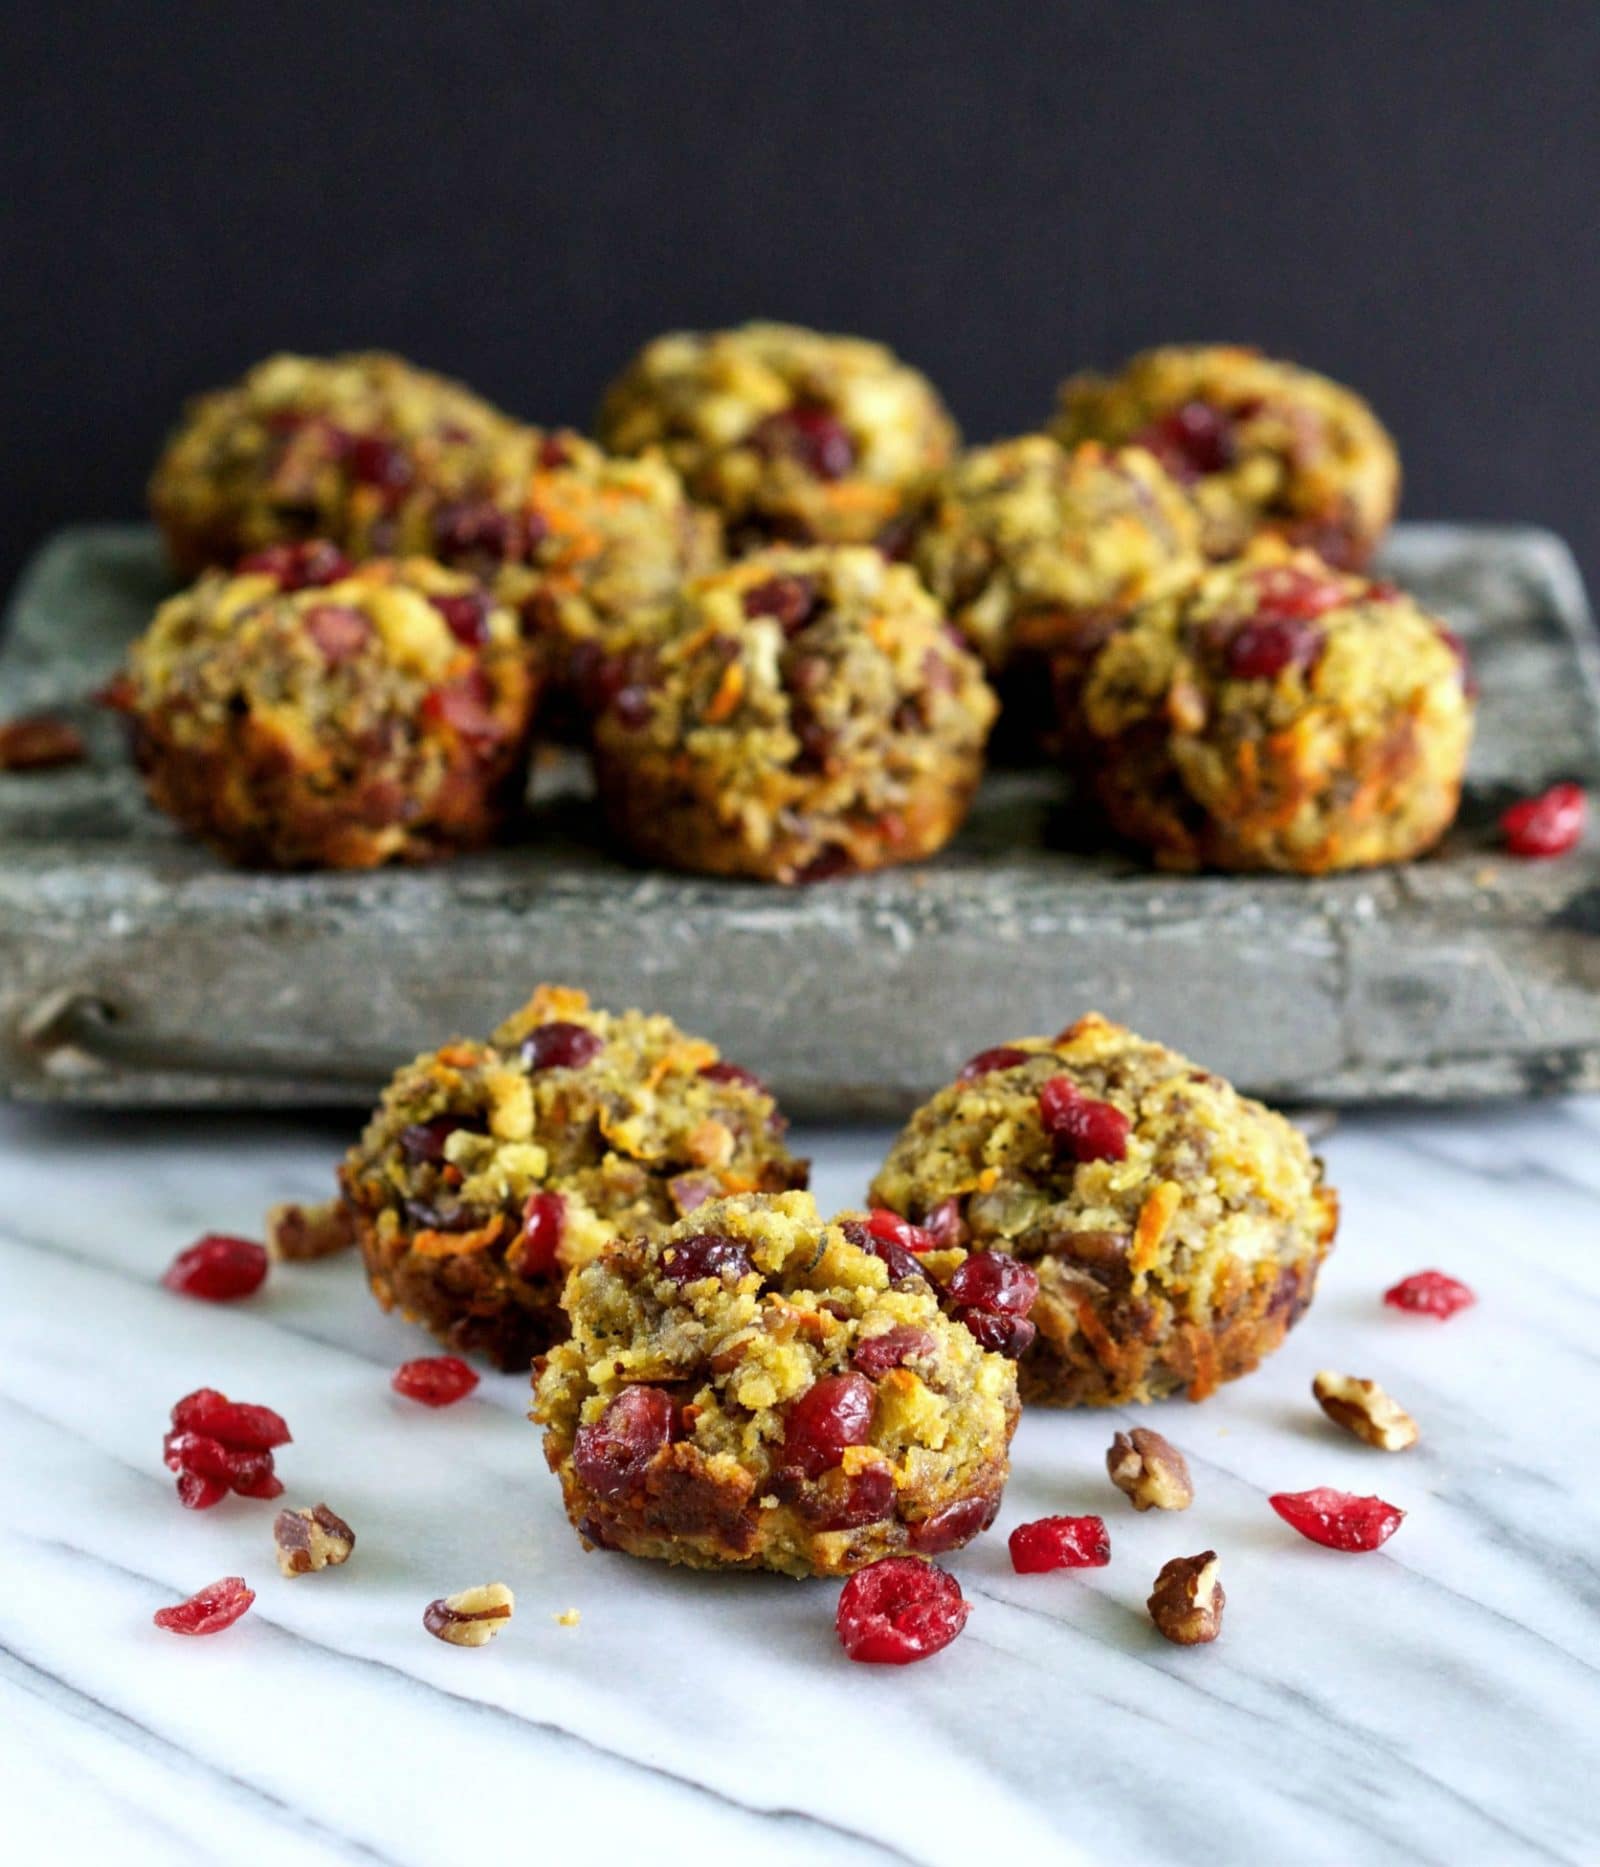 Cranberry and Cornbread Stuffing Muffins with Jones Sausage. Cornbread stuffing mixed with sausage, dried cranberries, shredded carrots & toasted pecans. Simply Sated